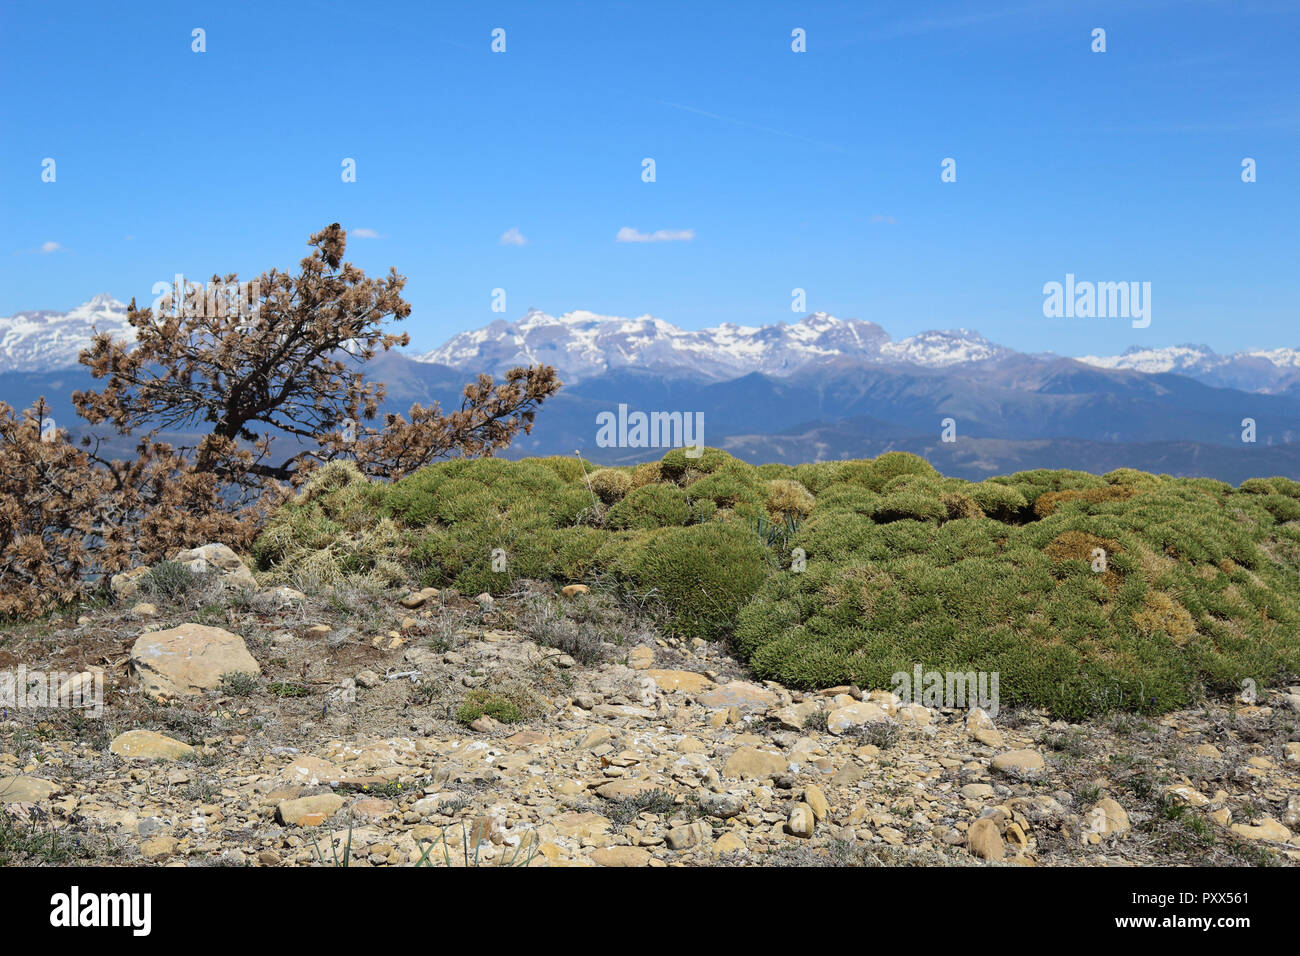 A bent dry fir tree next to some bushes and rocky soil with, as background, snow-clad mountains and a blue sky in Peña Oroel mountain, Aragon, Spain Stock Photo